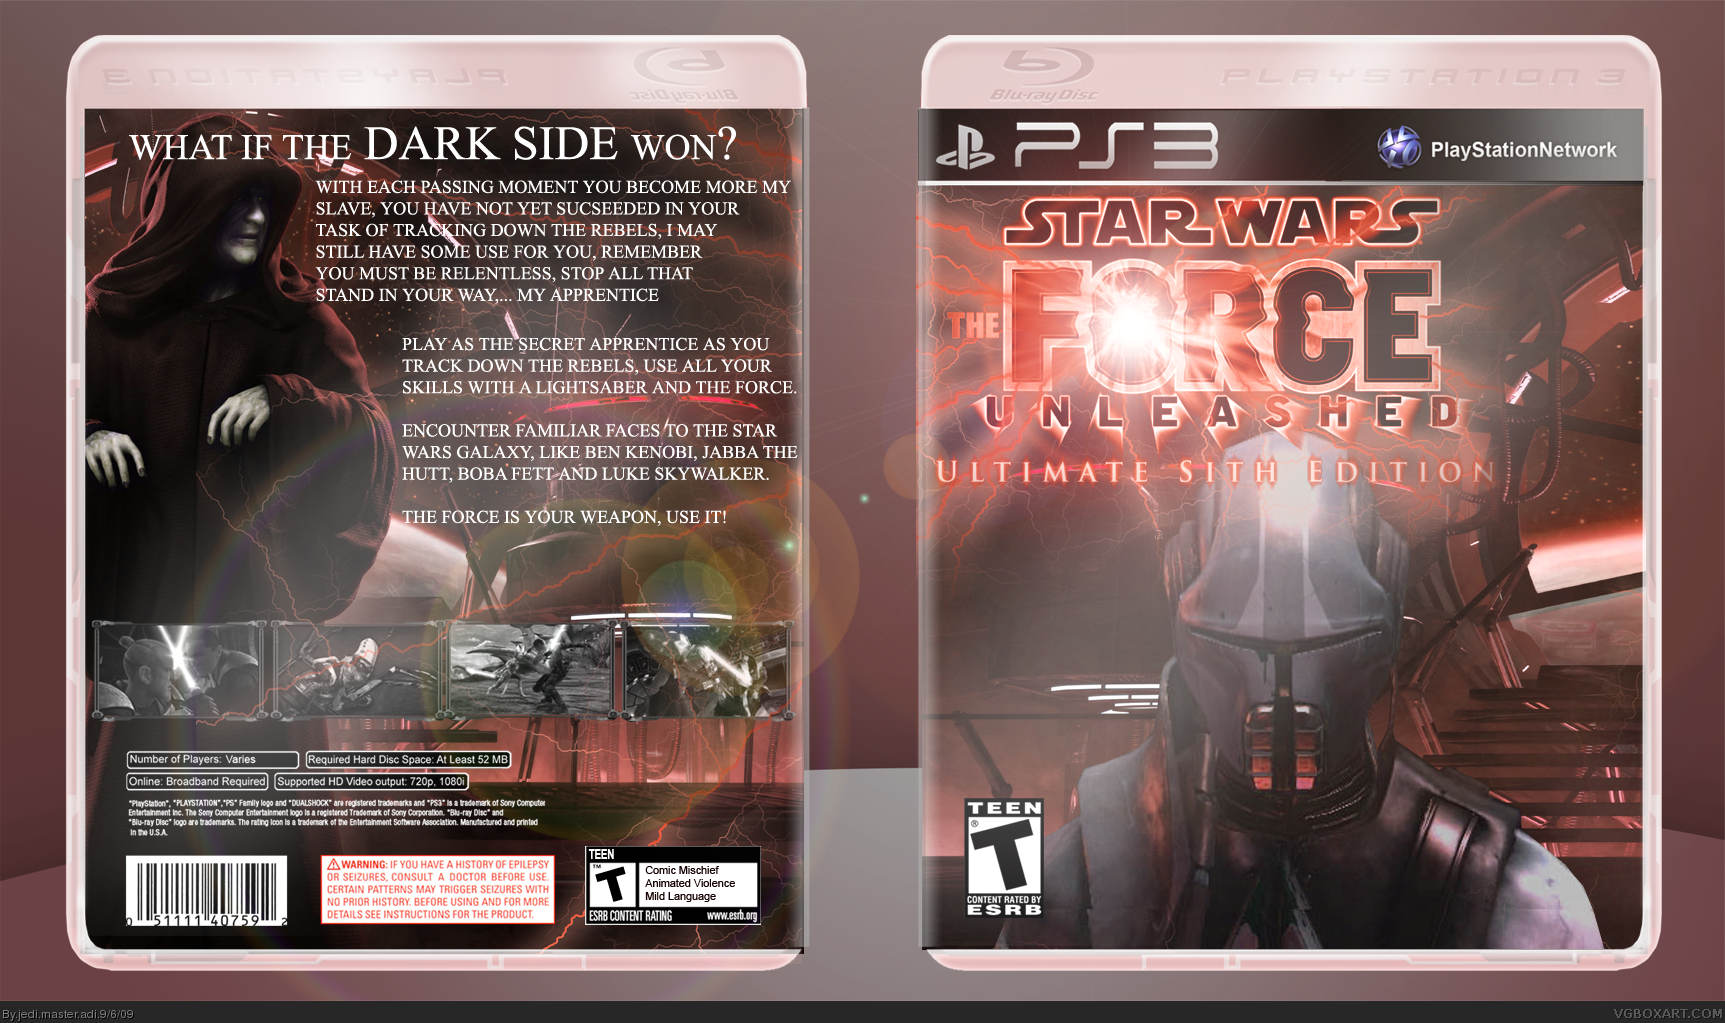 Диск ps3 Star Wars the Force unleashed. Звёздные войны the Force unleashed 3. Star Wars Force ps2. Star Wars the Force unleashed Ultimate Sith Edition обложка.